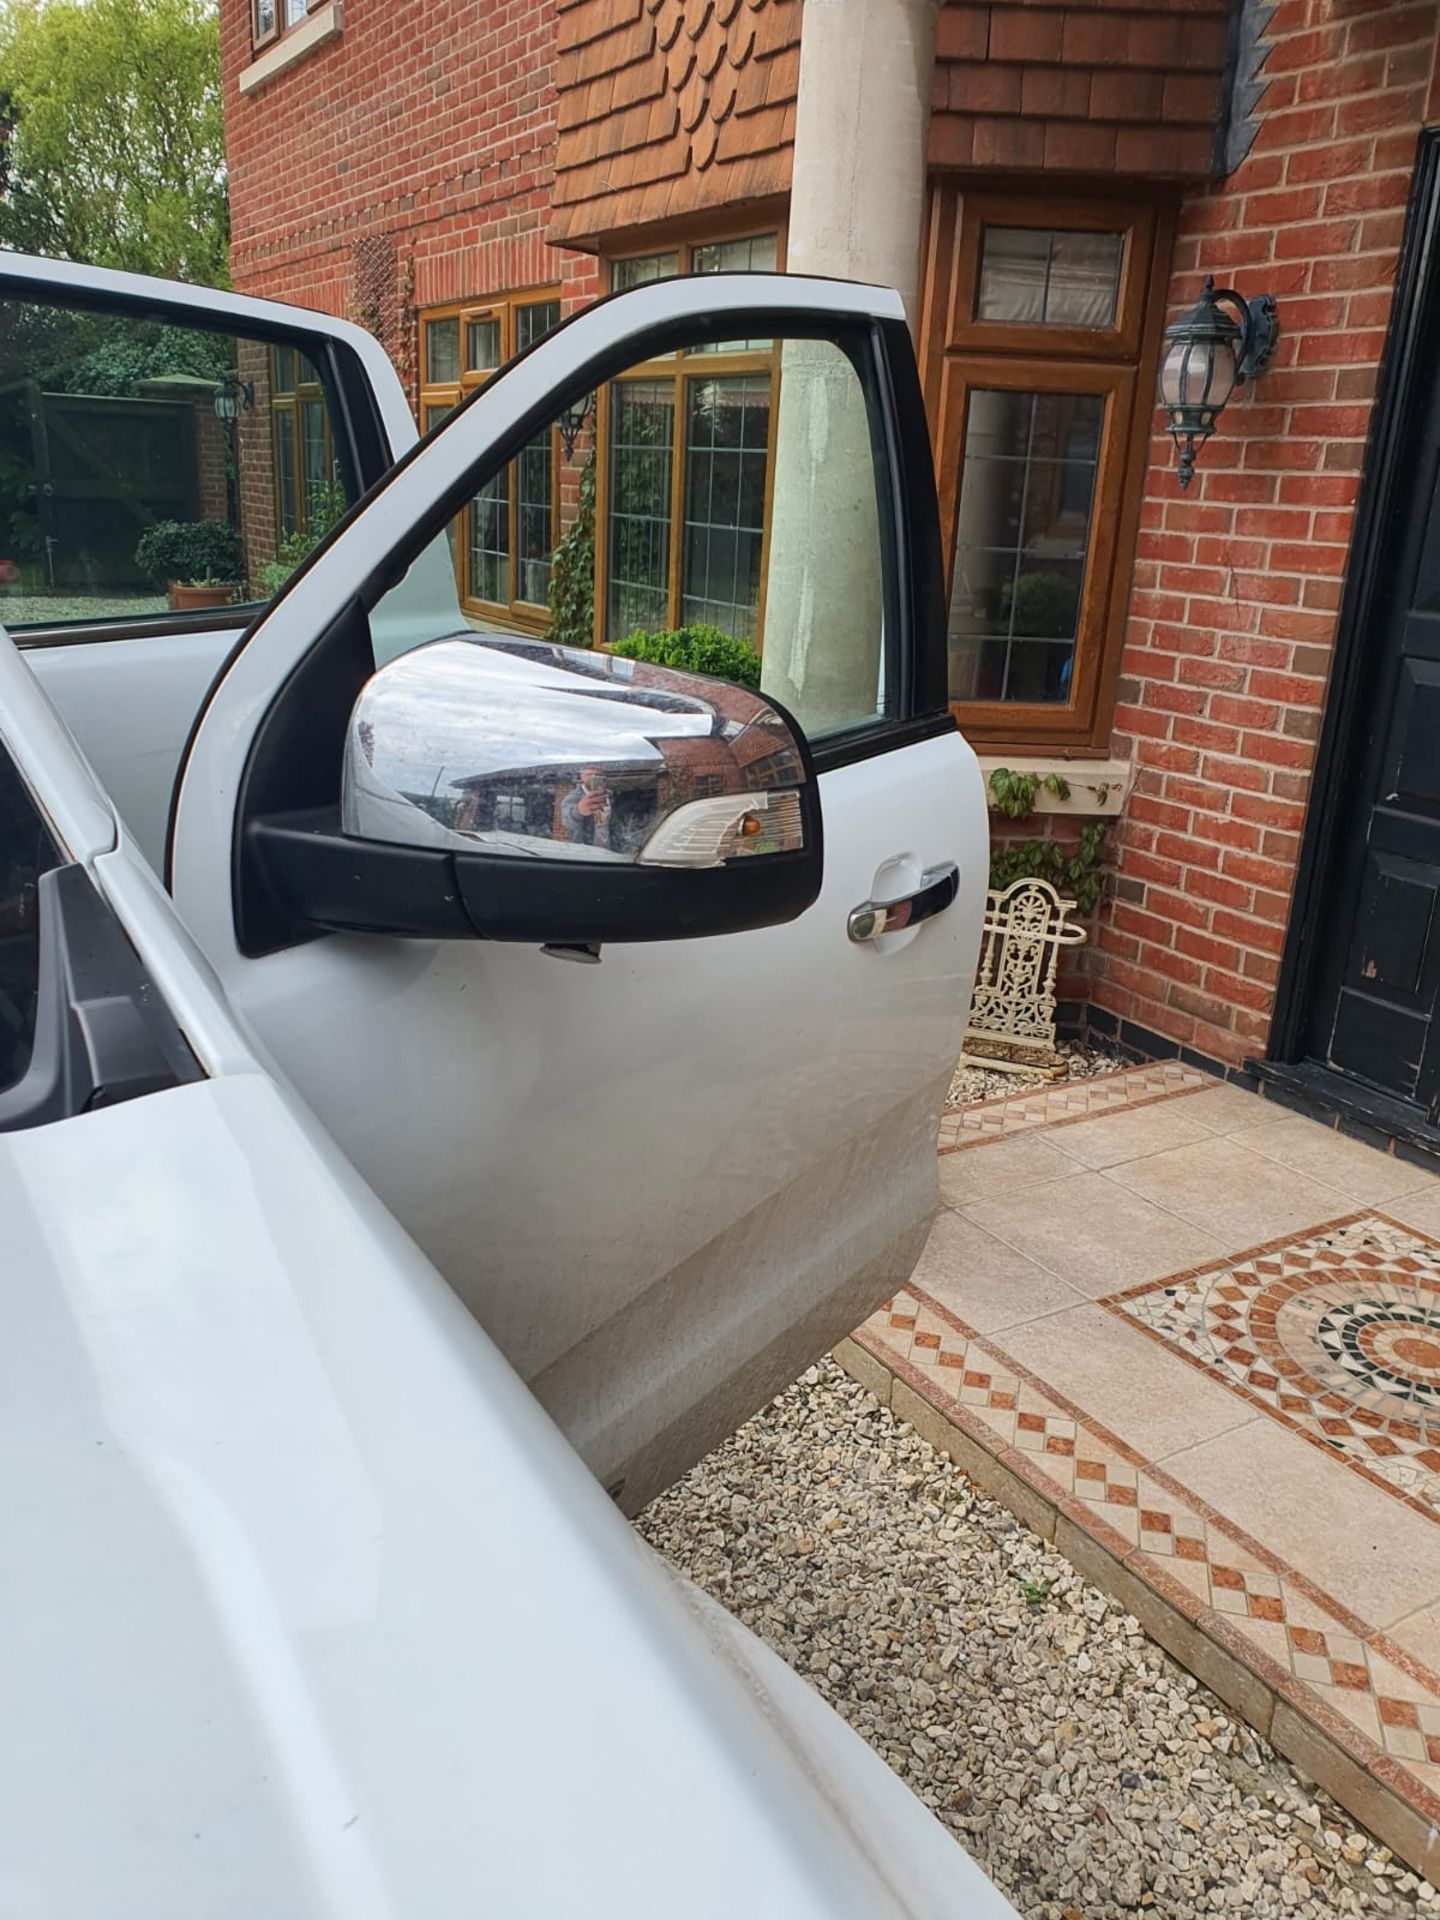 2012/62 FORD RANGER LIMITED 4X4 TDCI WHITE PICK UP, 124,828 MILES *NO VAT* - Image 4 of 12